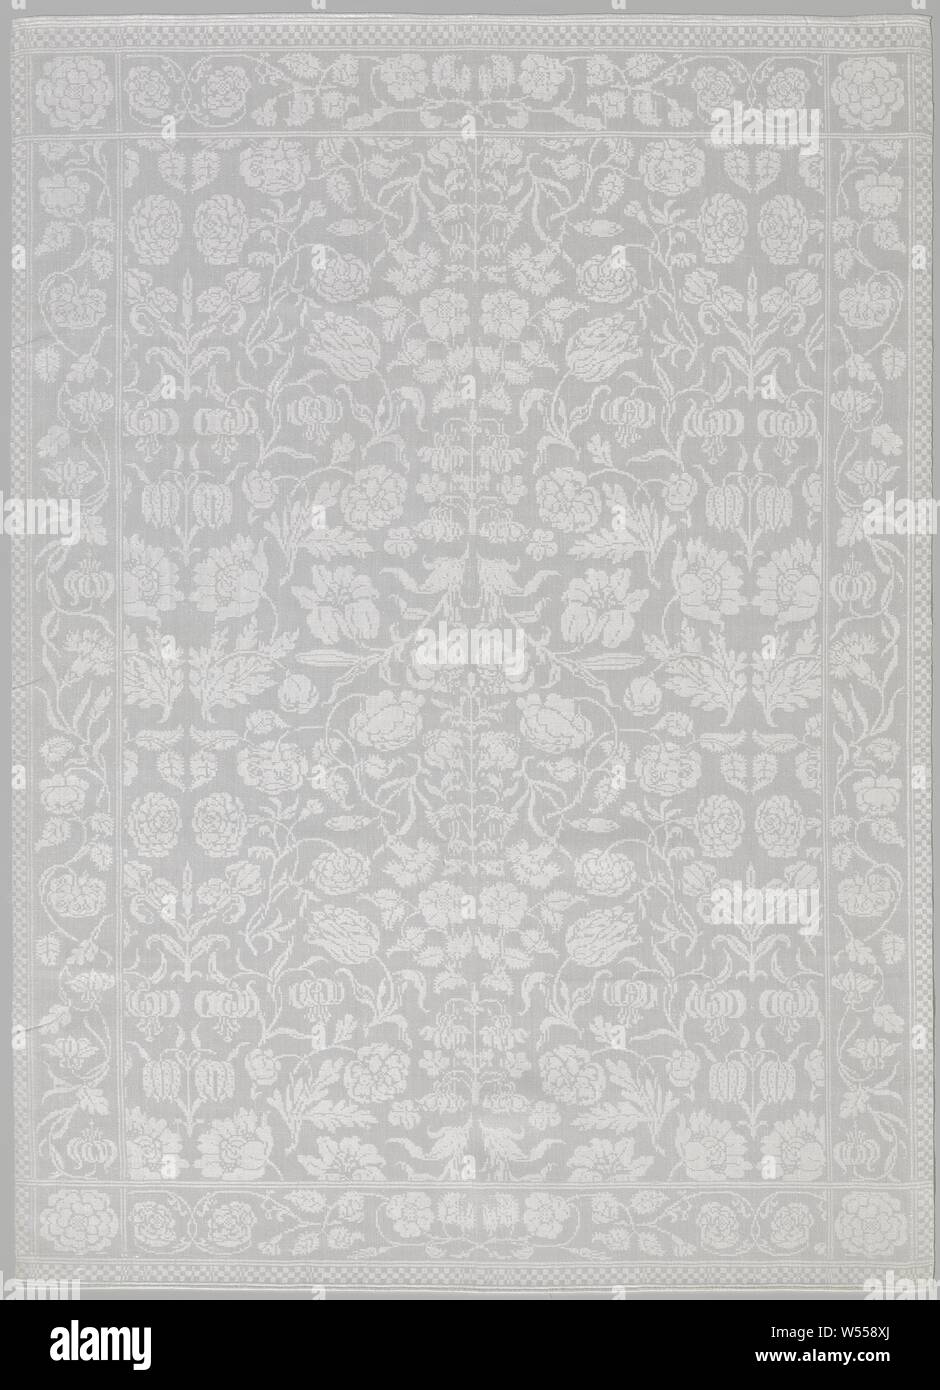 napkin with flower pattern, White linen damask napkin with a pattern of scattered flowers. Brand IG and 12., anonymous, Noord-Nederland, 1670 - 1680, linen (material), damask, h 108.6 cm h 108.8 cm w 78.2 cm w 78.4 cm Stock Photo